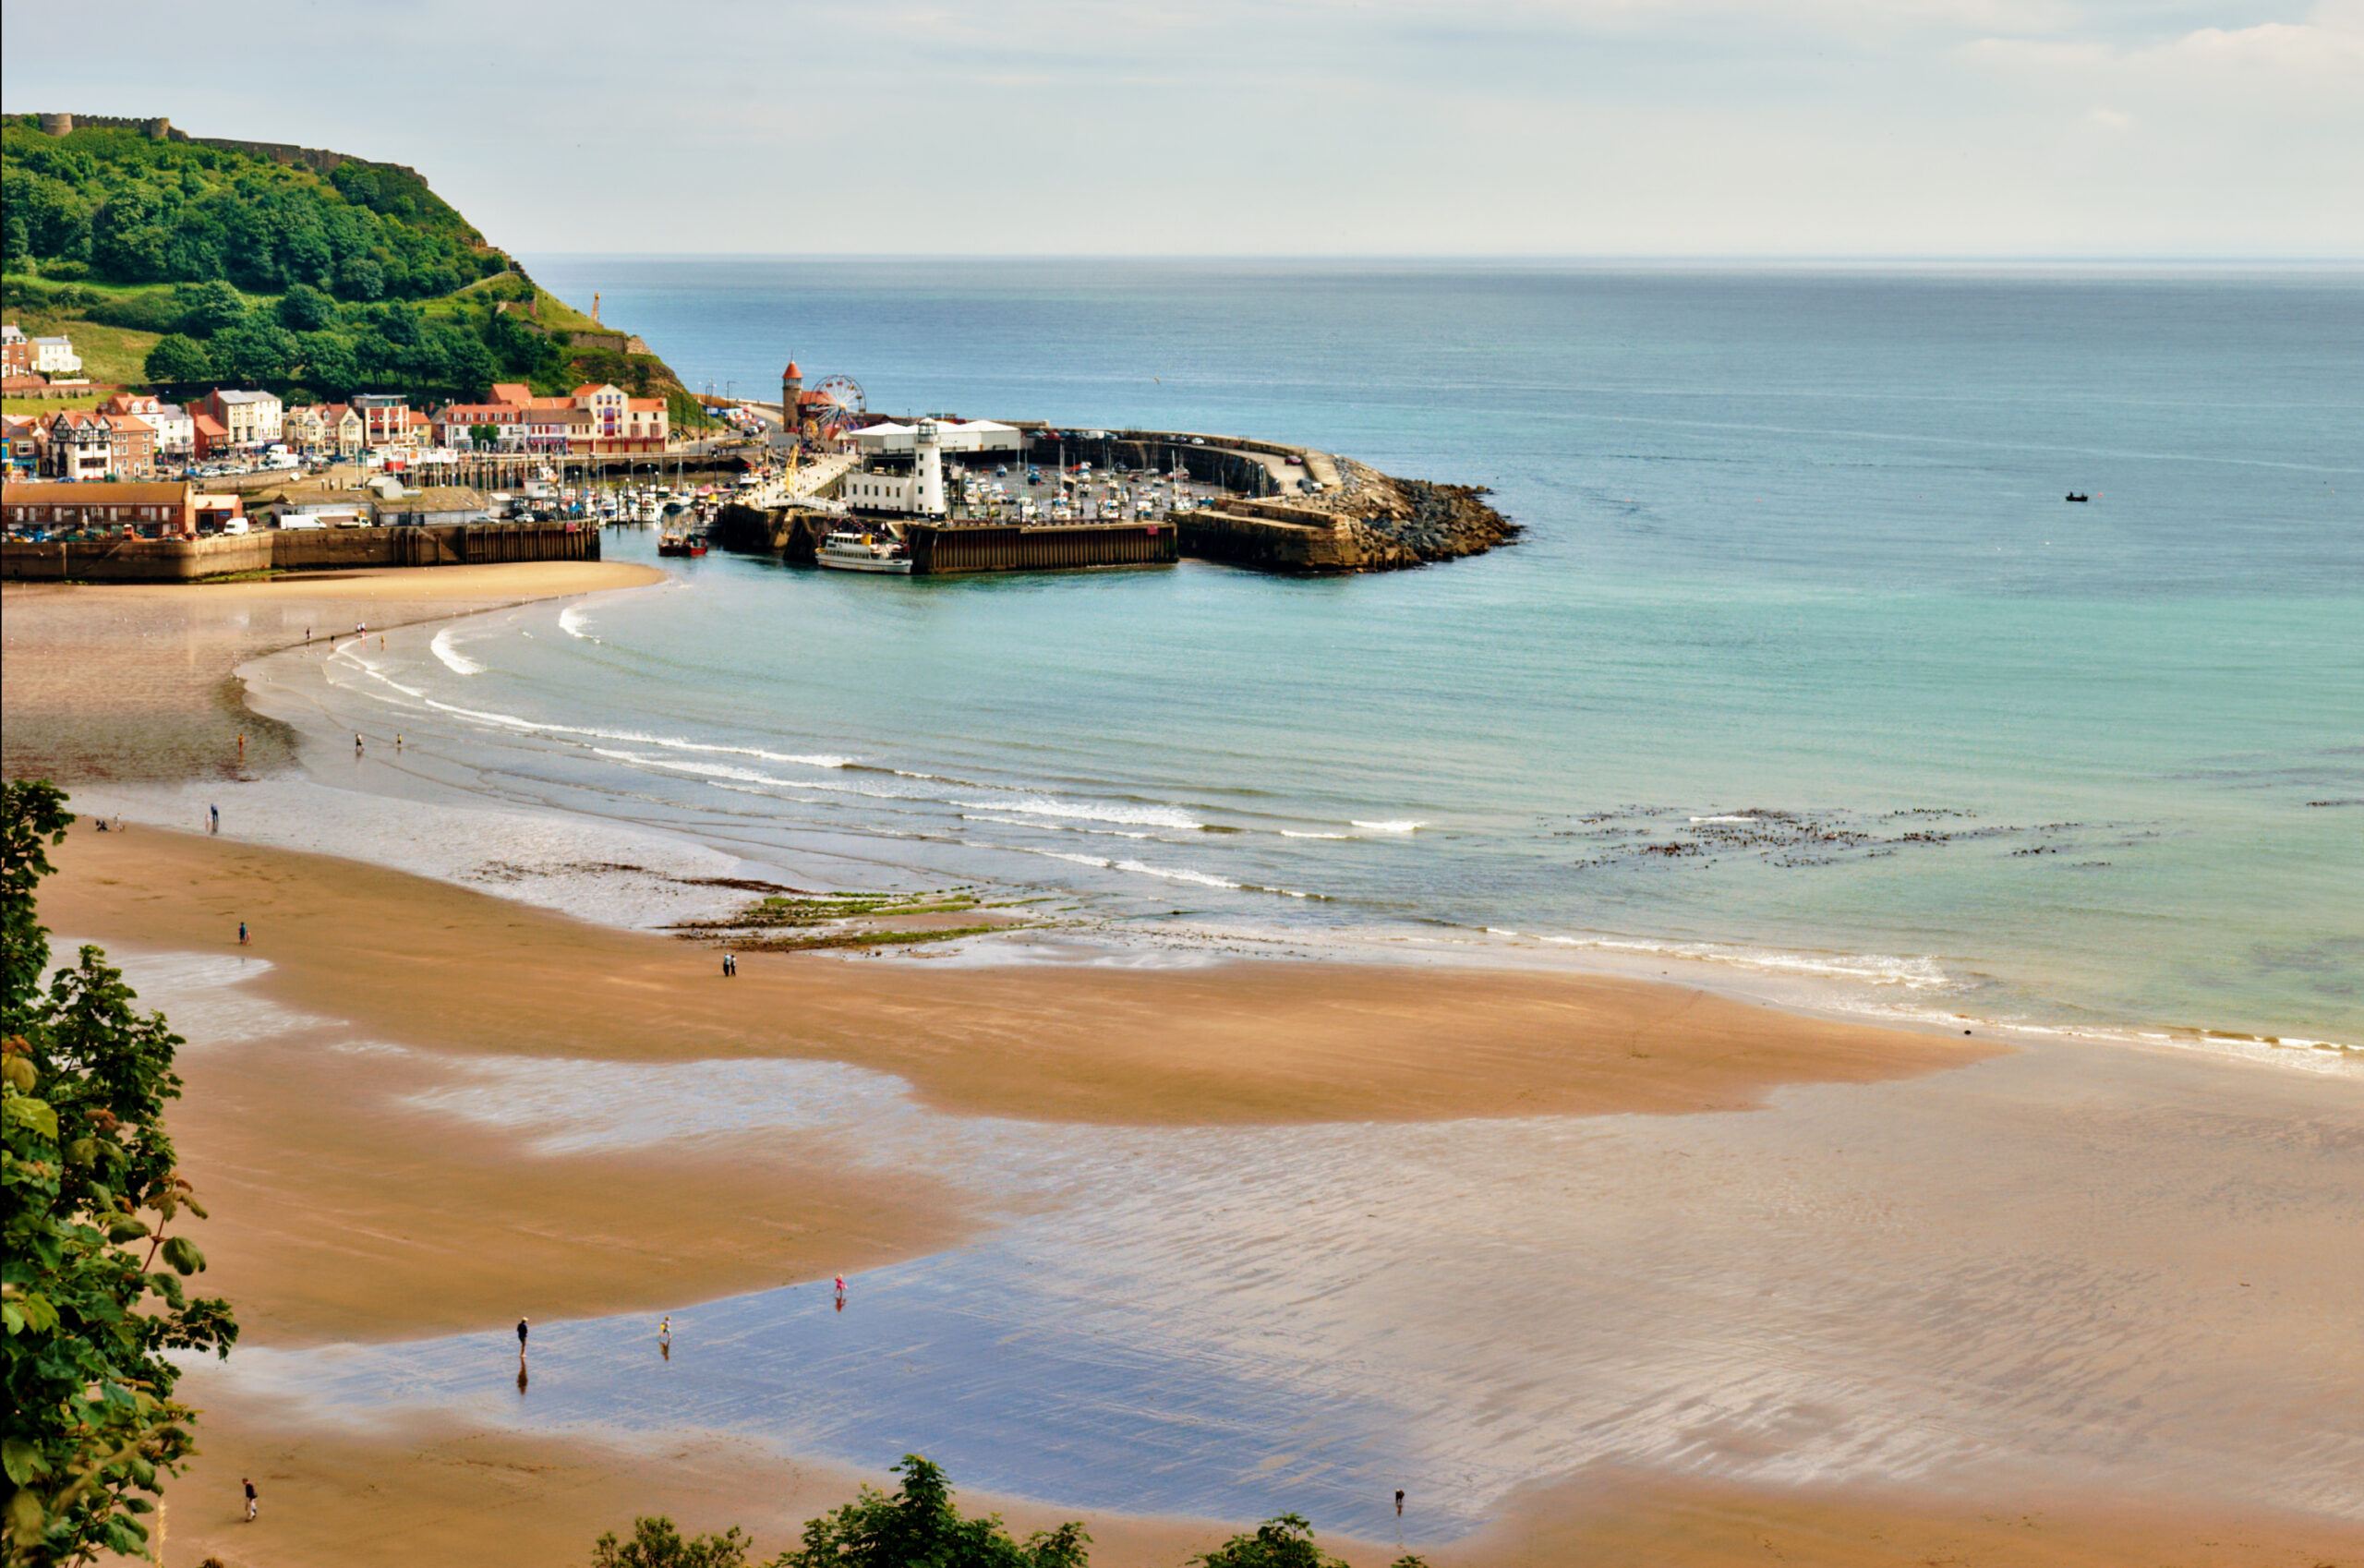 An aerial view of  the sandy beach and harbour of Scarborough, a popular holiday destination on the East coast of England